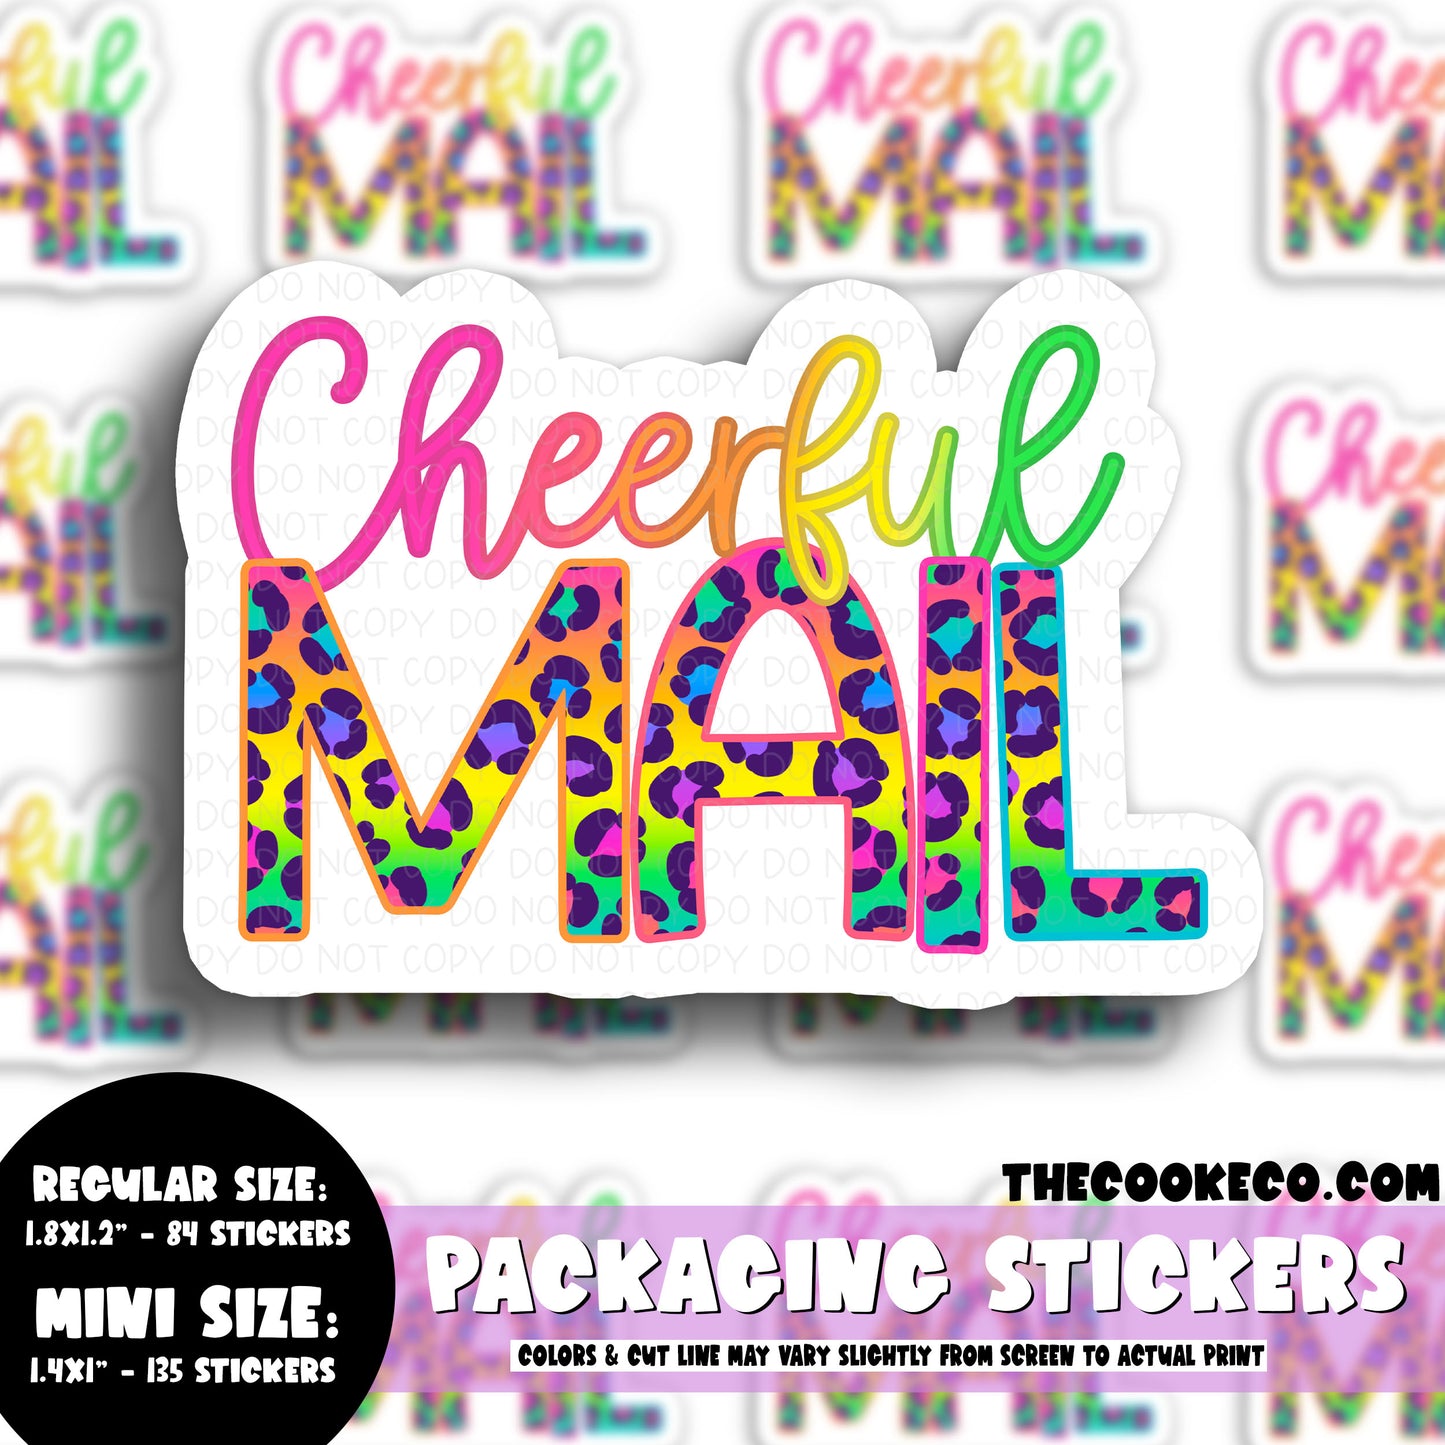 Packaging Stickers | #C0538 - CHEERFUL MAIL RAINBOW LEOPARD